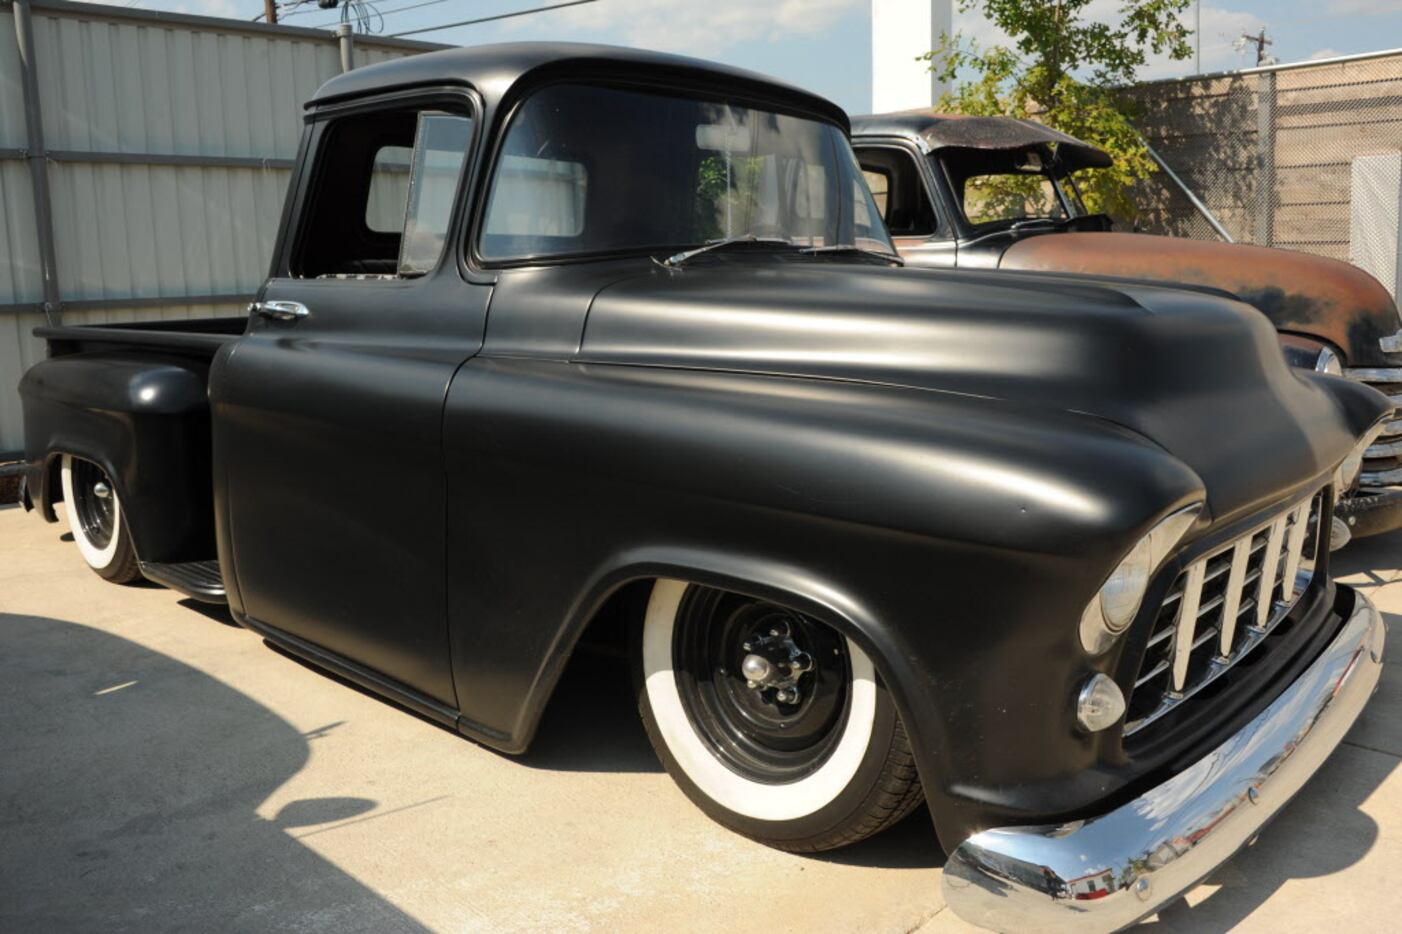 A lowered and painted '50s truck is on display at the custom car show at Texas Ale Project...